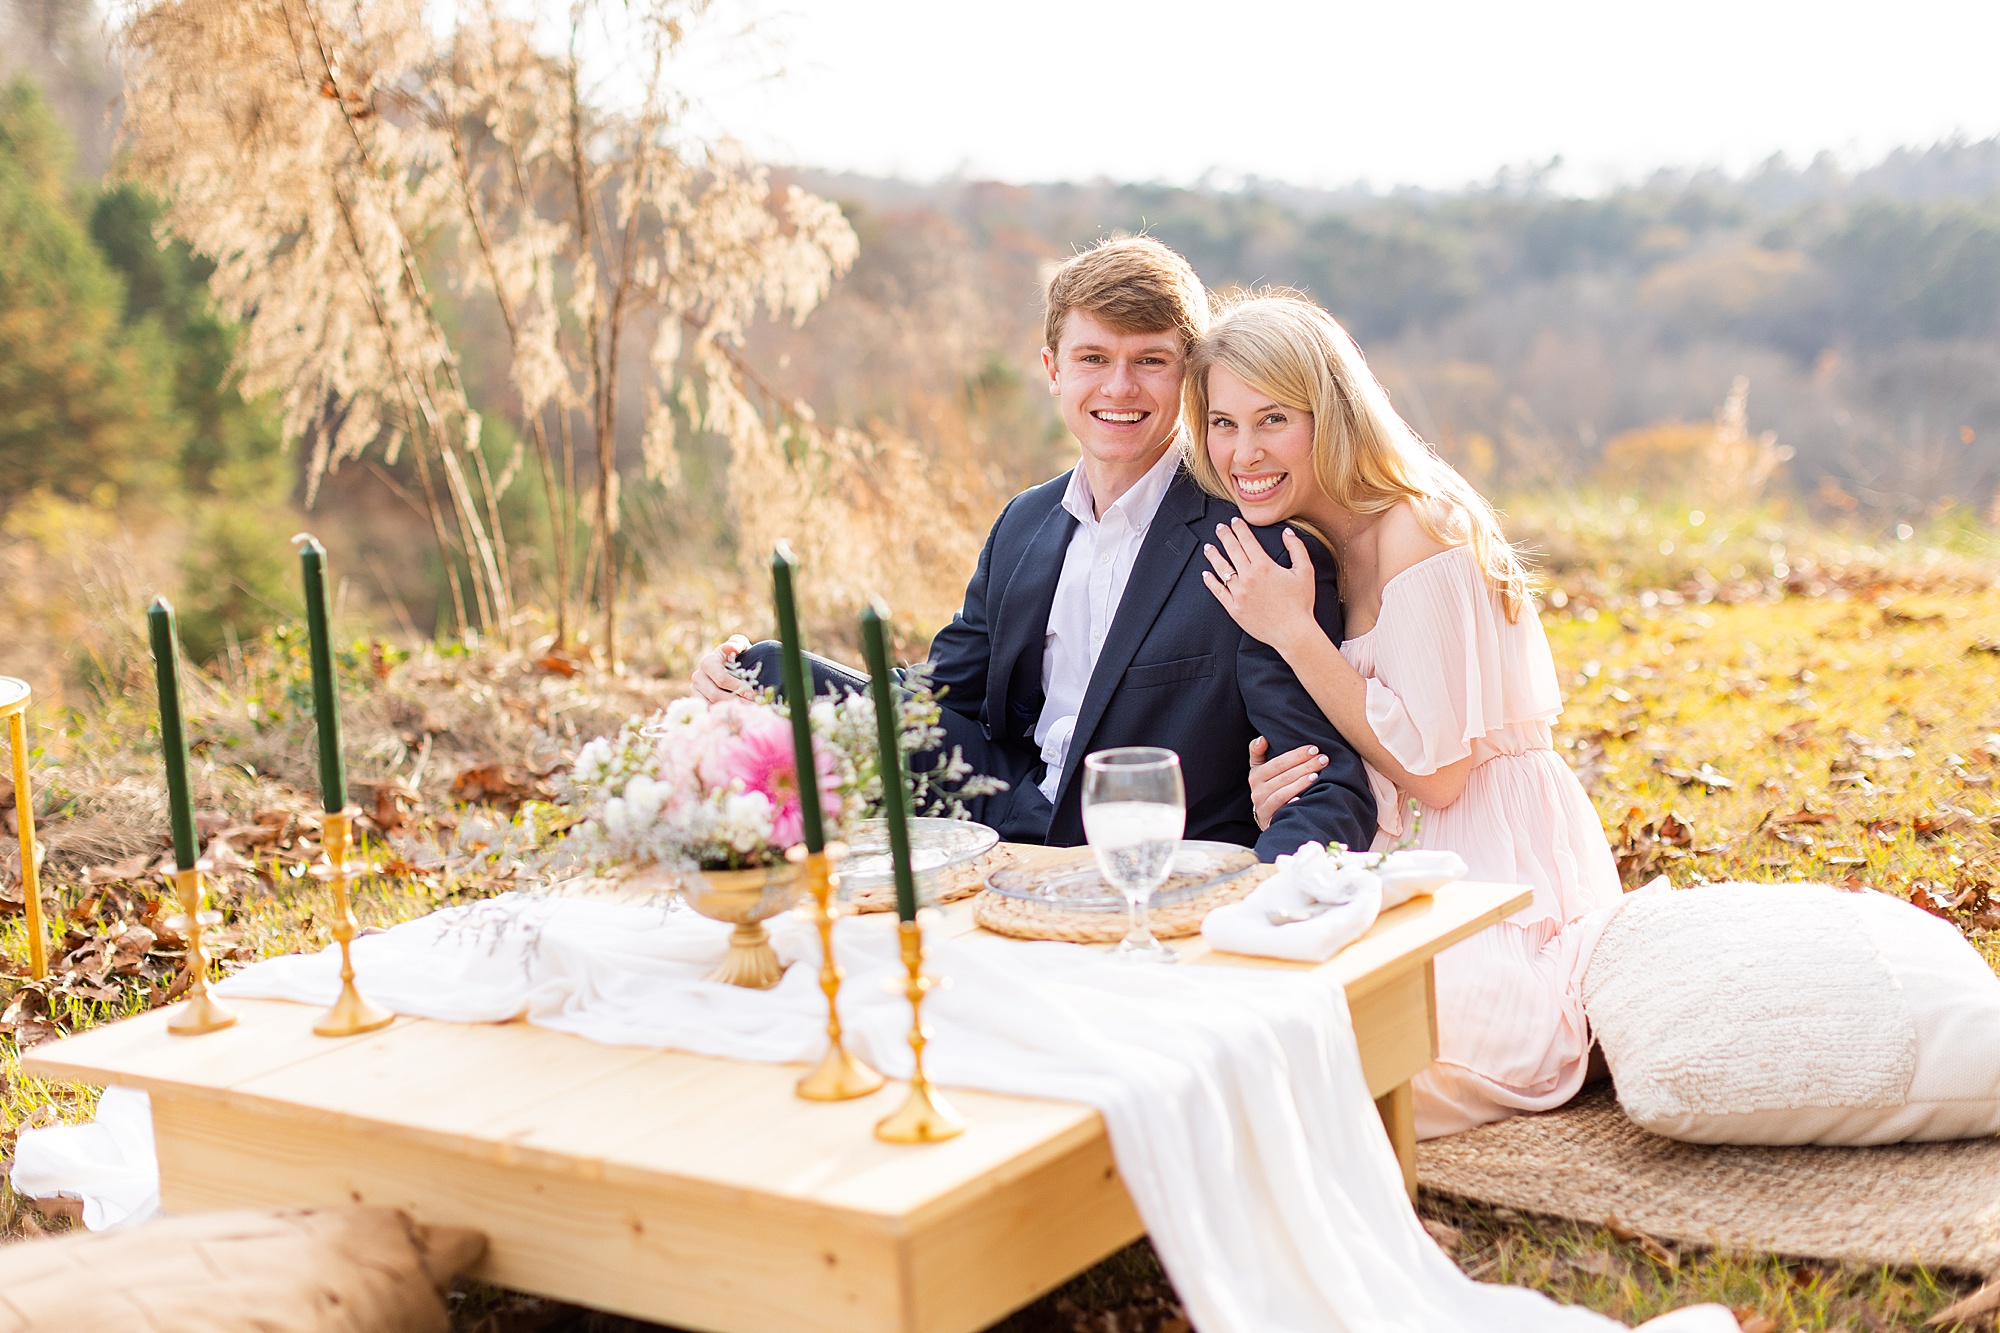 Eleanor Stenner Photography - a Birmingham, Alabama wedding photographer - shares how to plan the perfect proposal